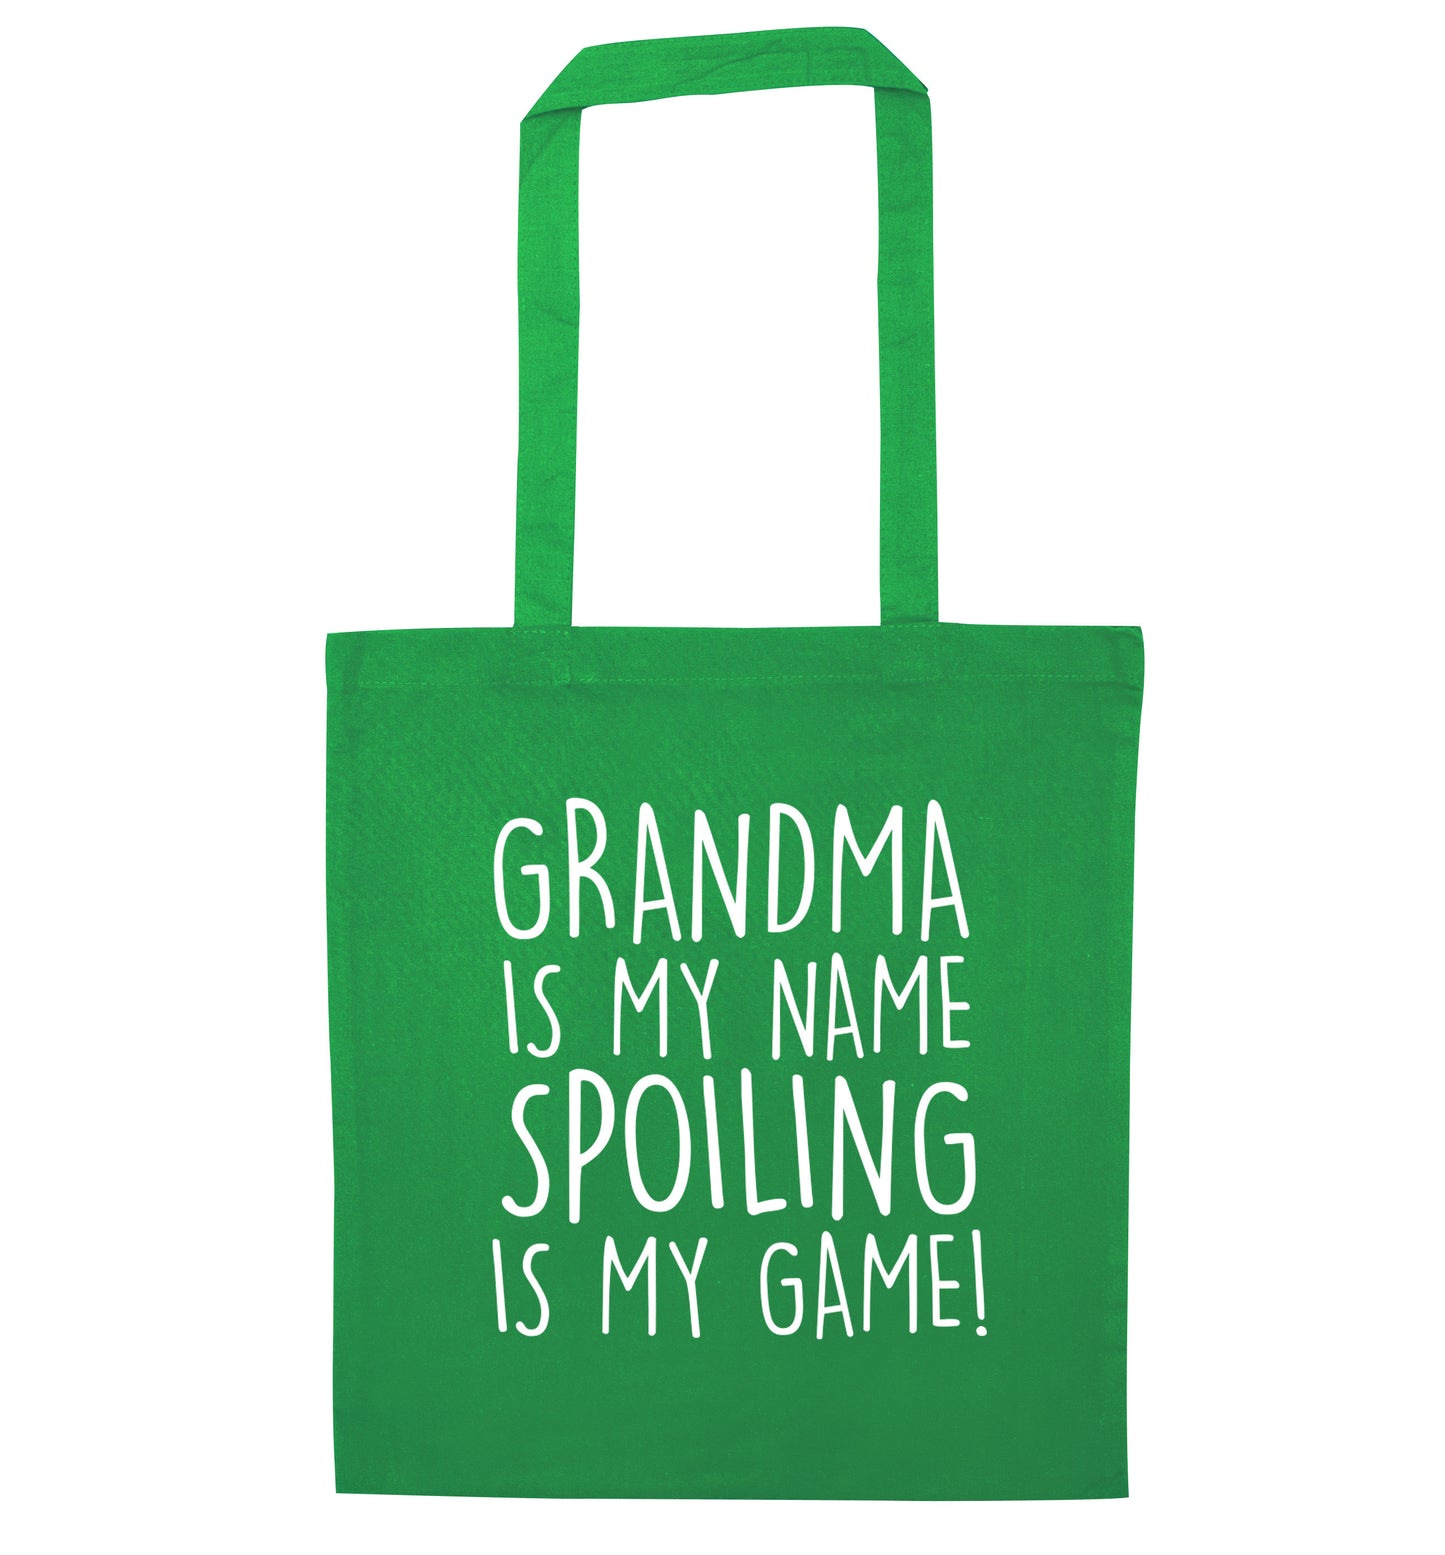 Grandma is my name, spoiling is my game green tote bag